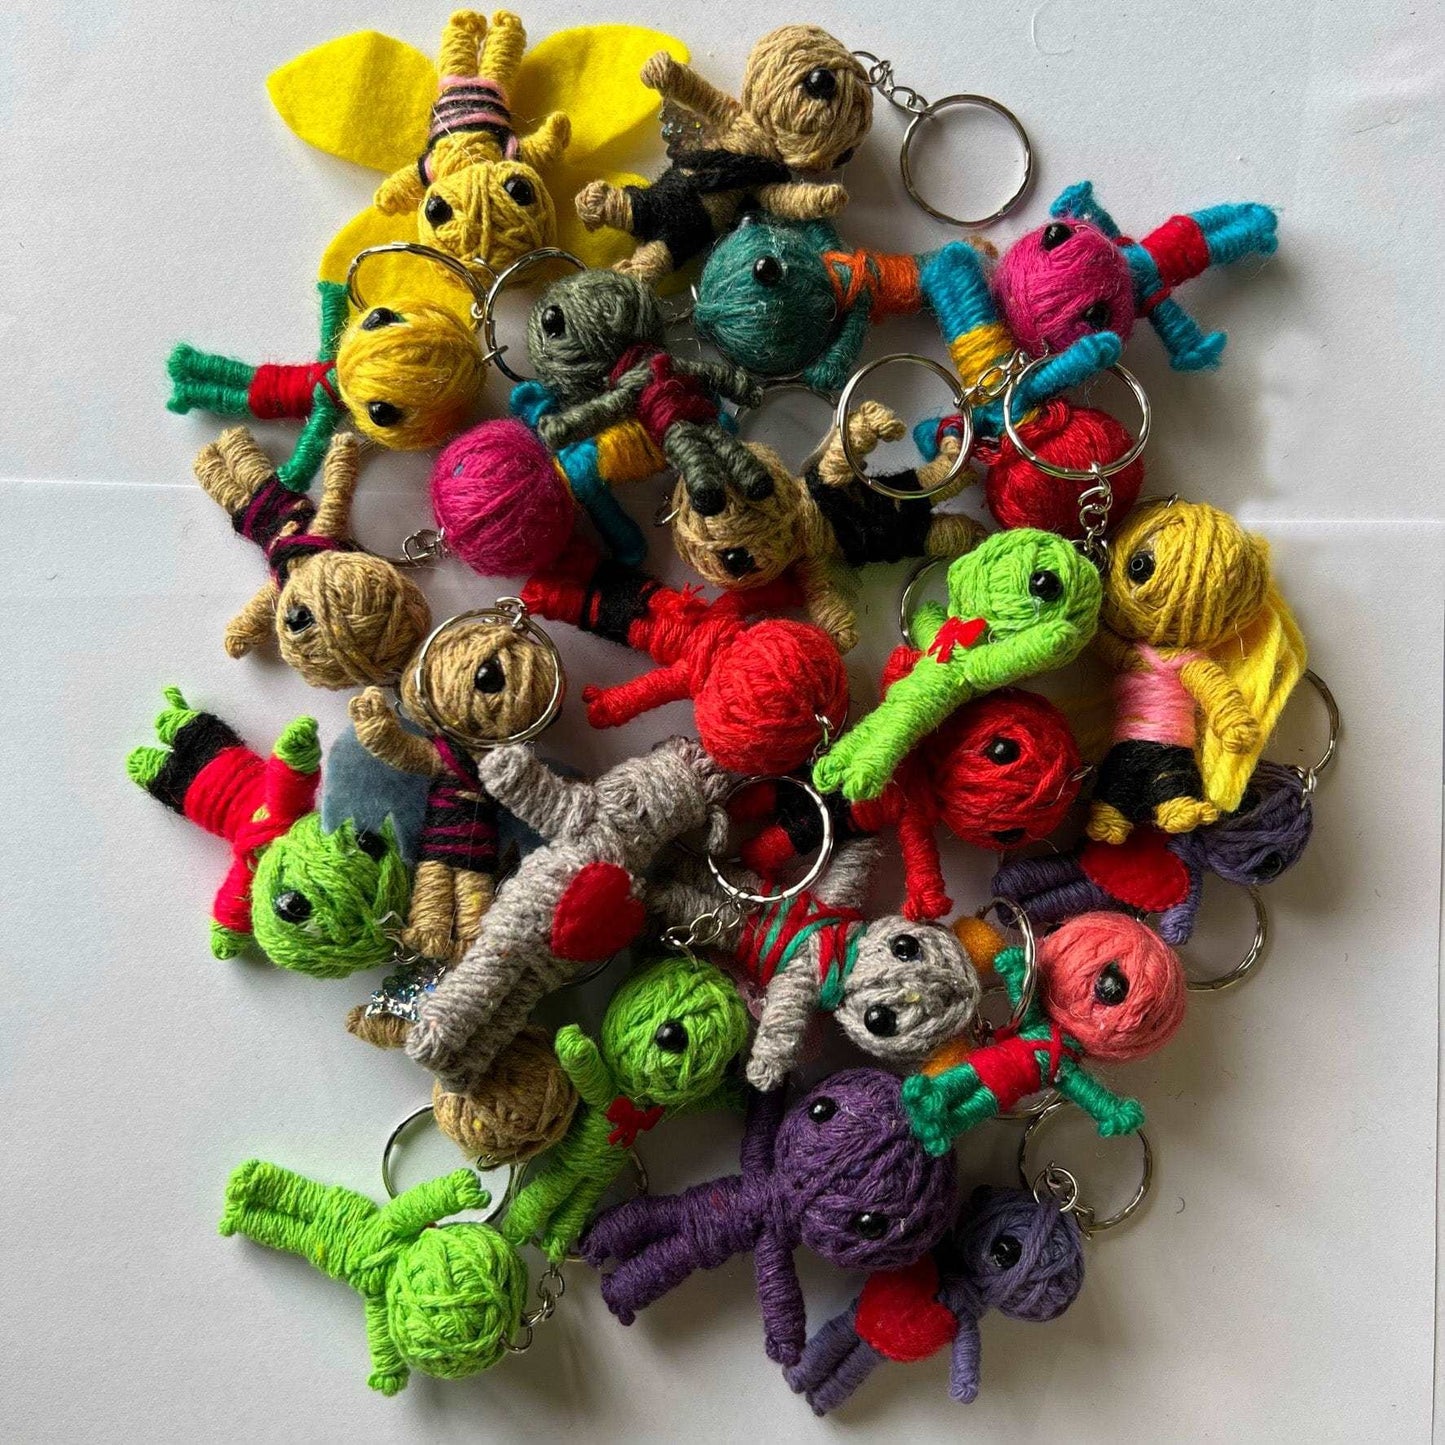 12 X Voodoo Doll Keyrings Keychains Keyring Keychain Birthday Party Bag Fillers